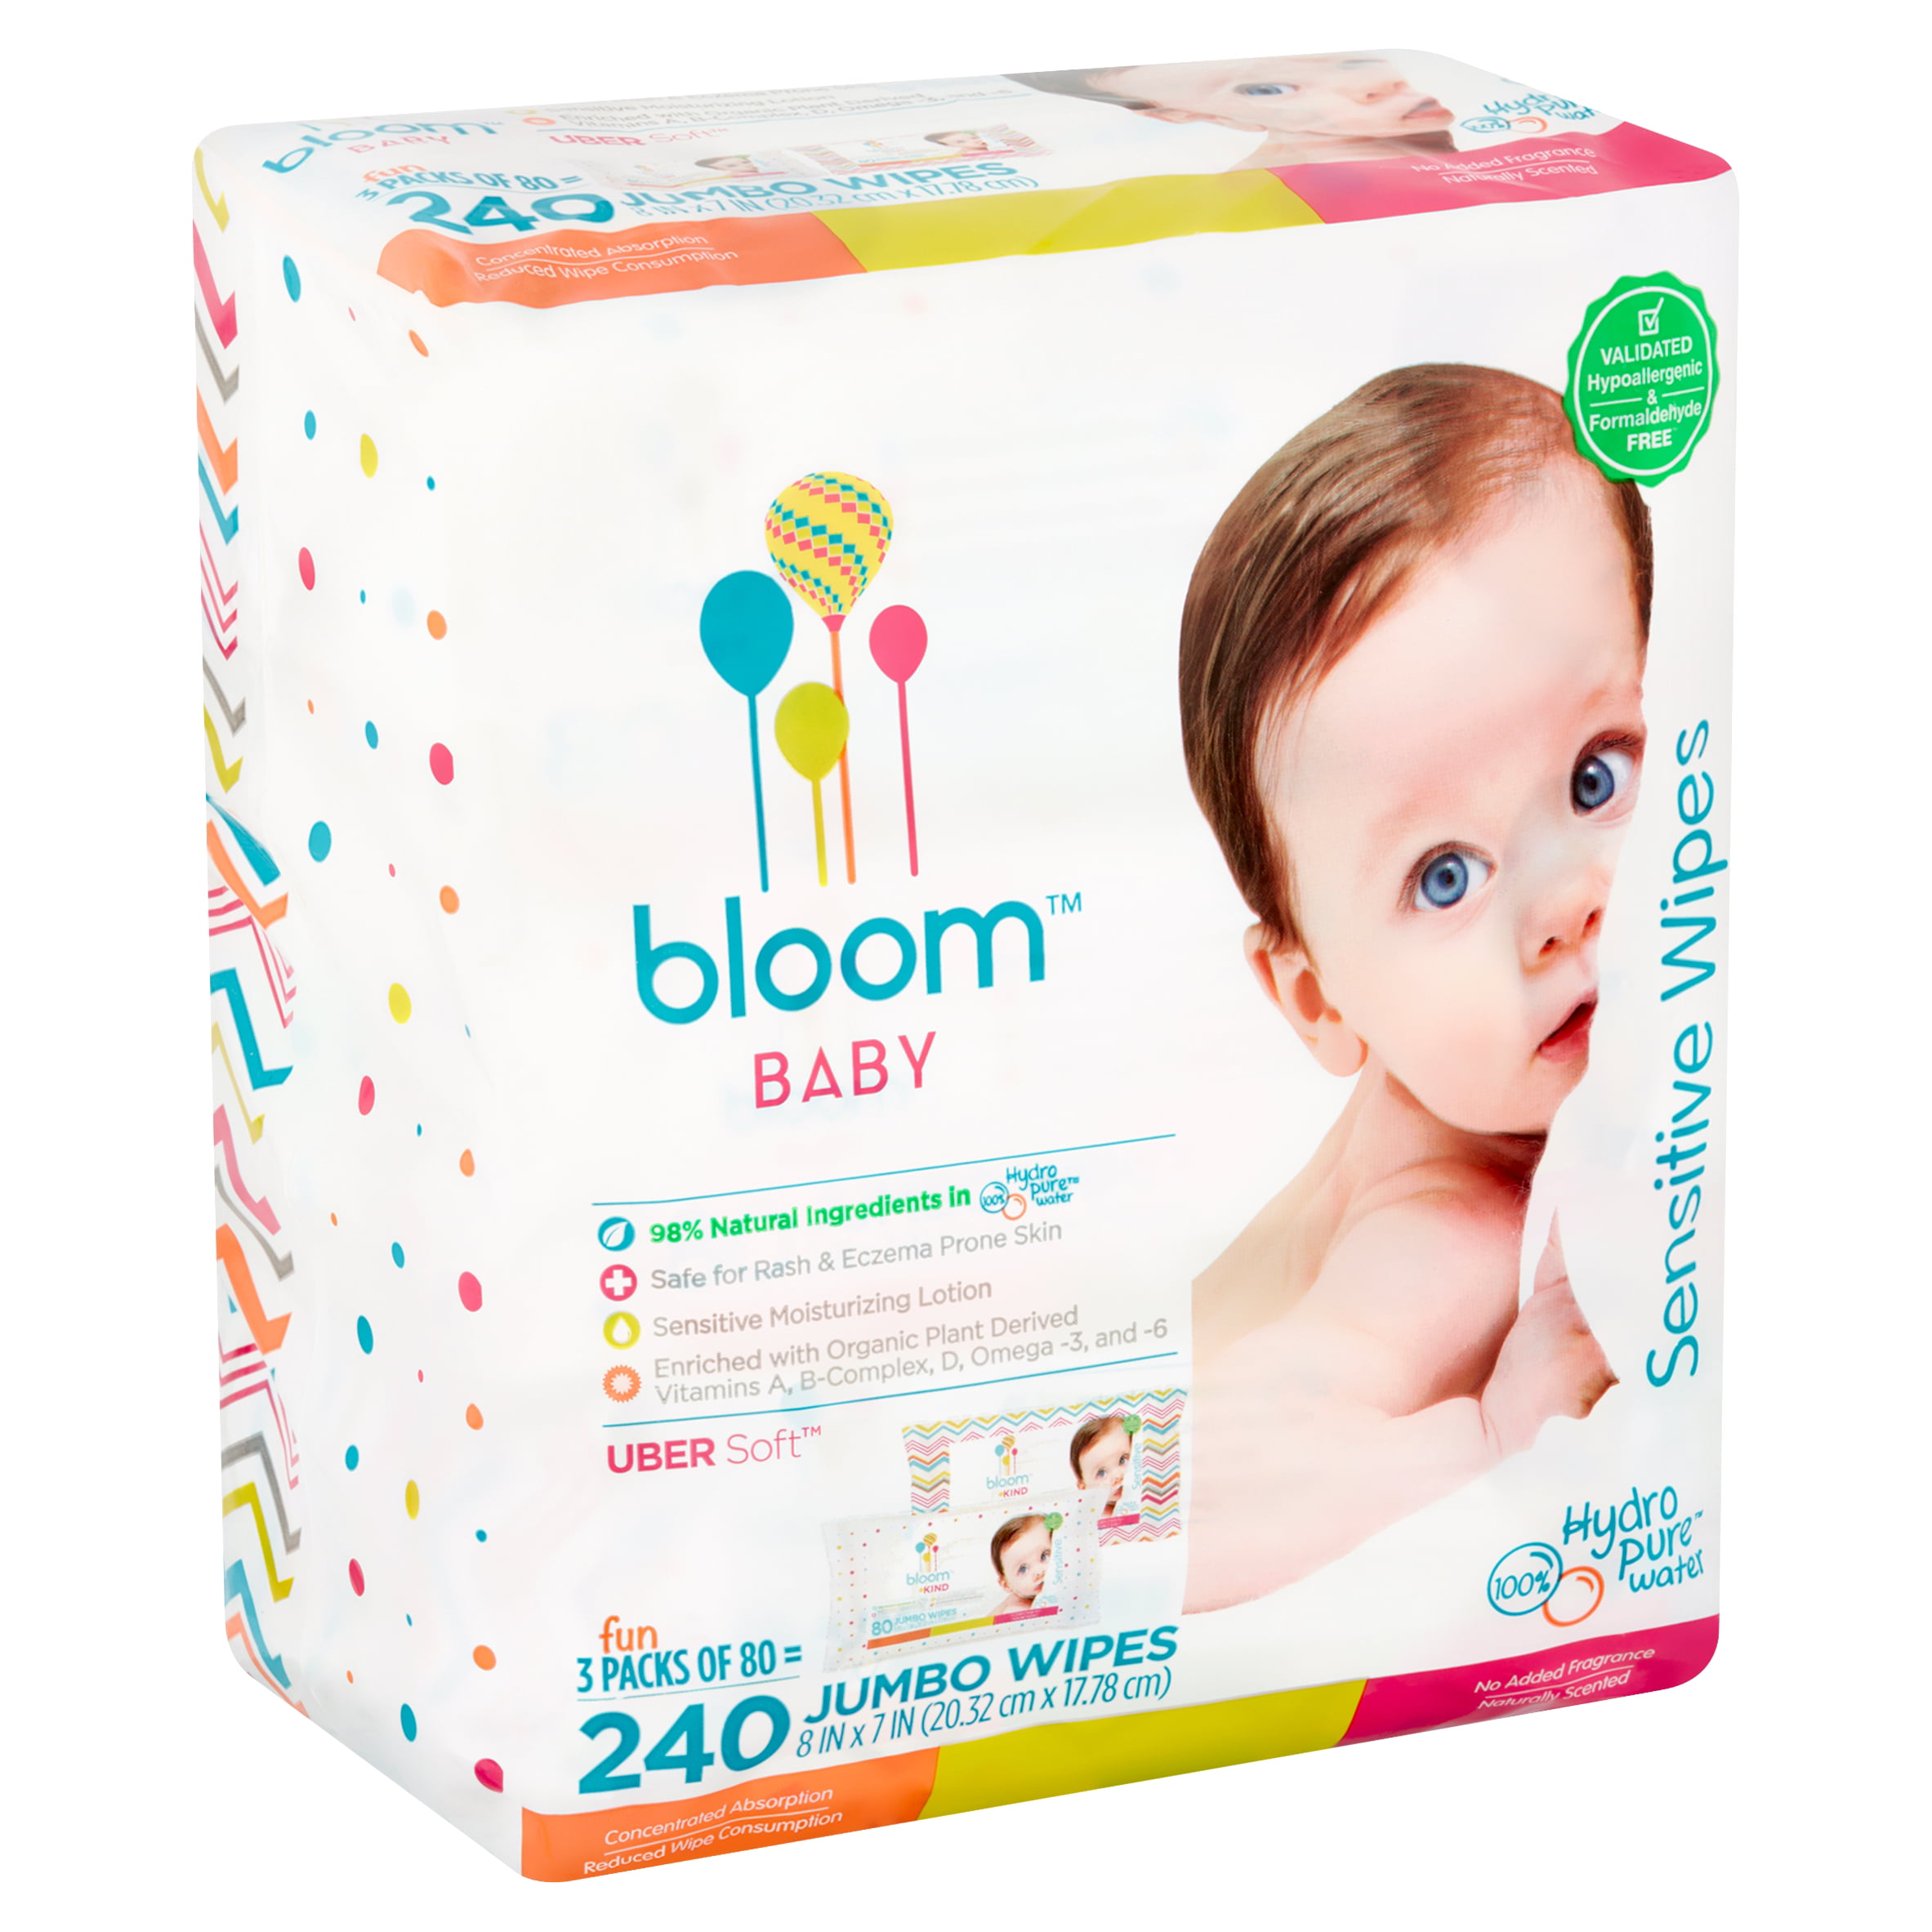 Bloom Baby Sensitive Baby Wipes #bloomtogether